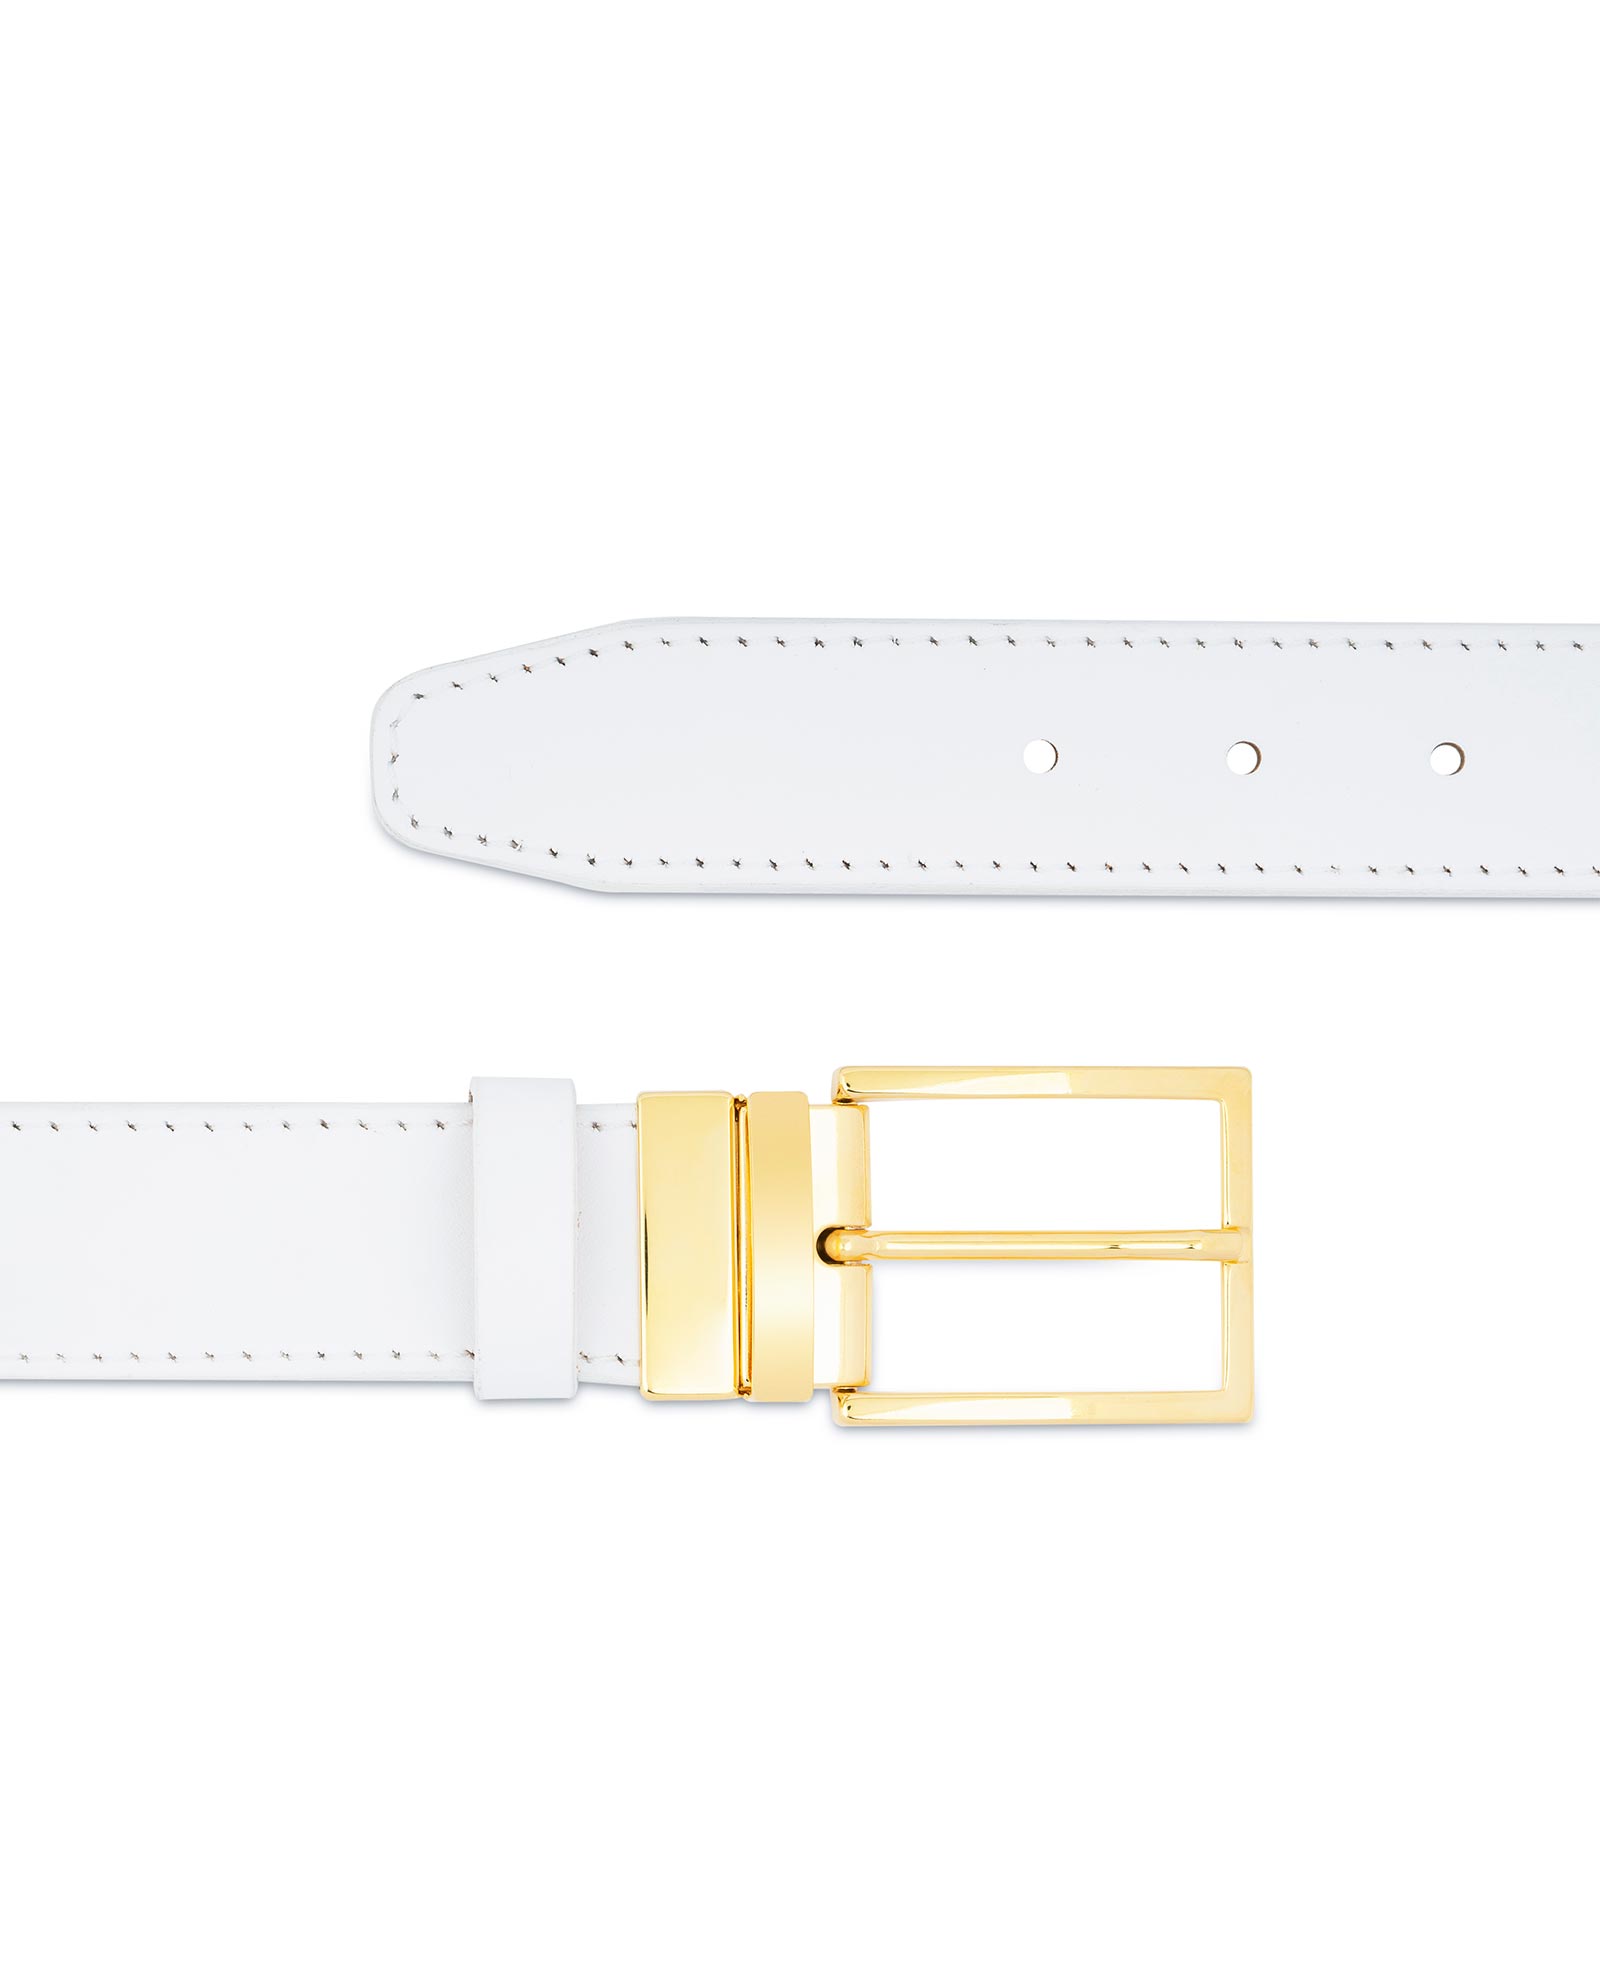 White Leather Belt Gold Buckle 1 1/2 Handmade Thick 